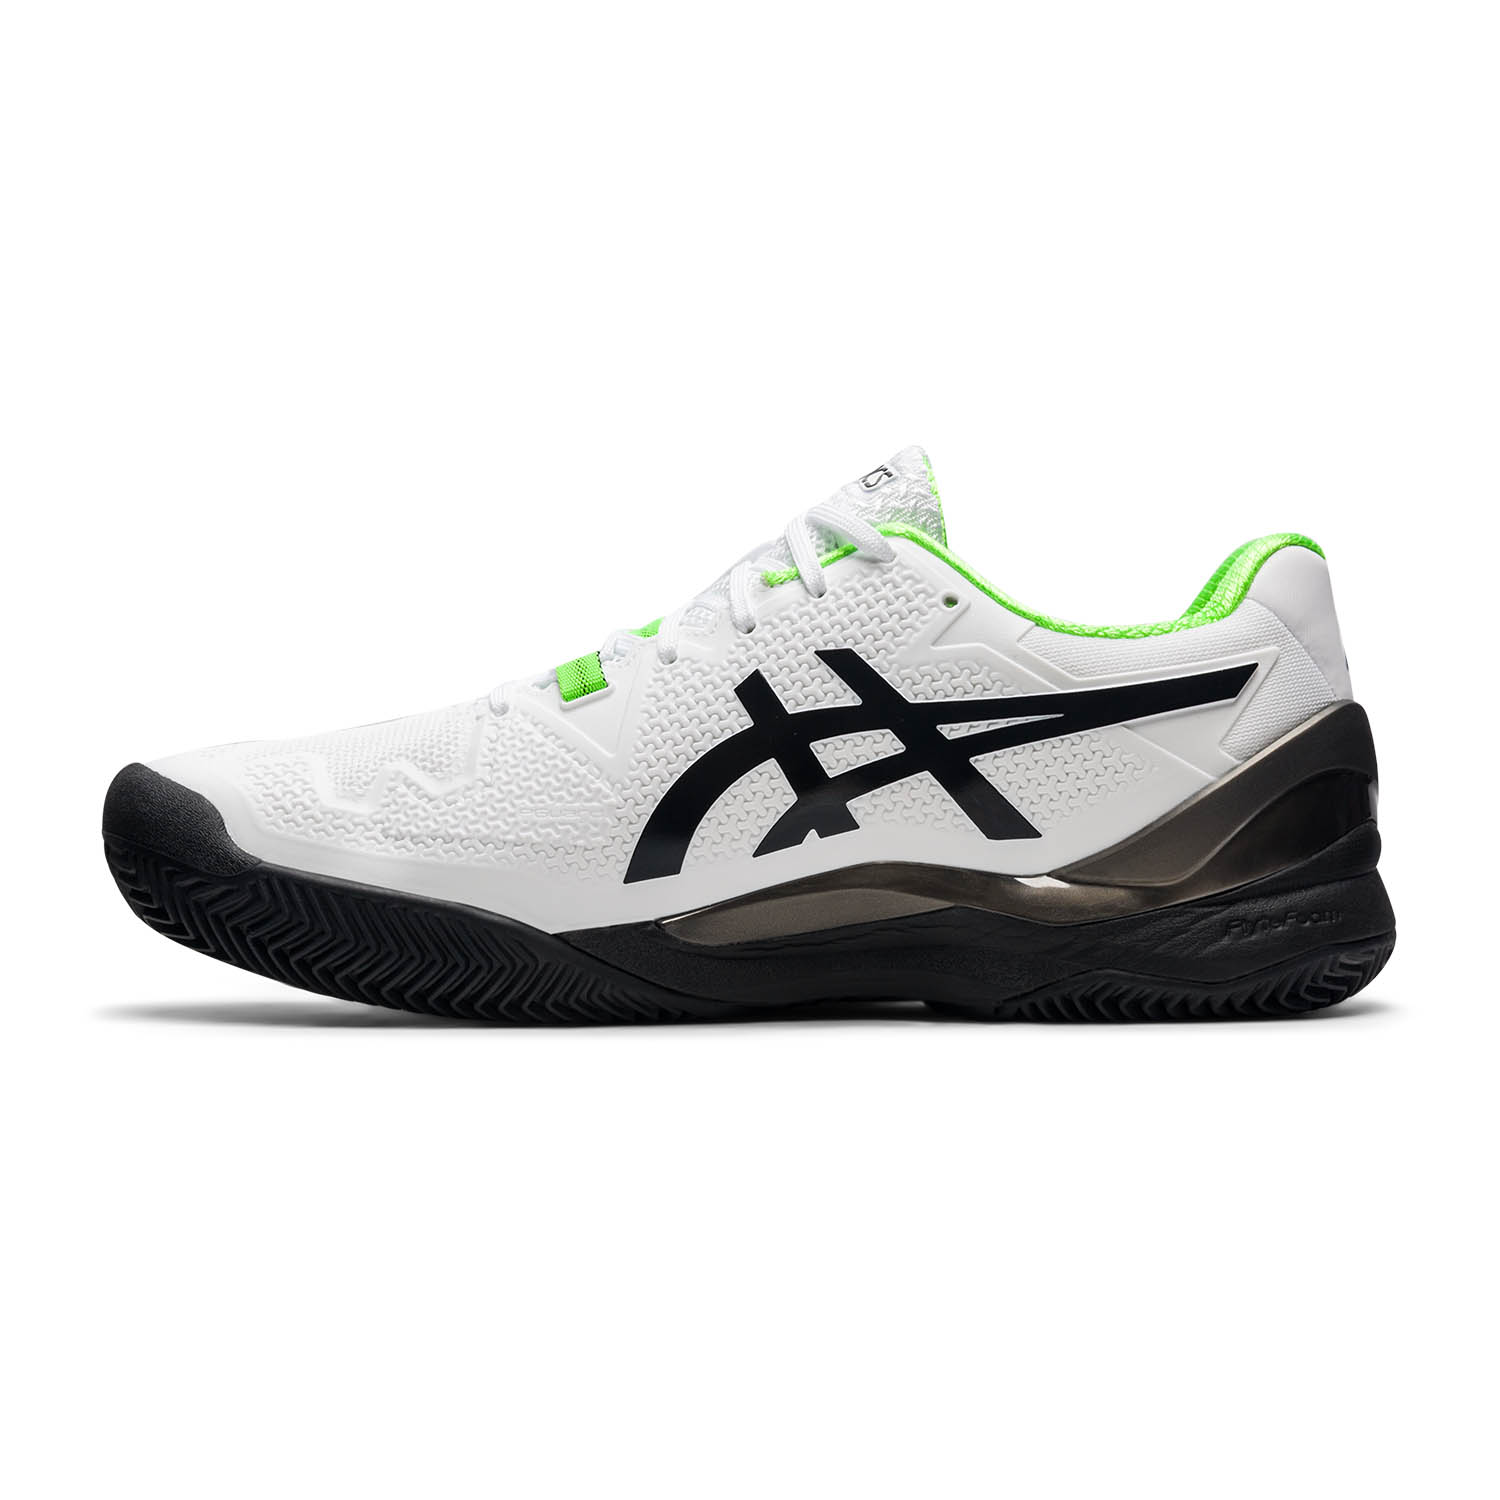 Asics Gel Resolution 8 Clay Men's Tennis Shoes - White